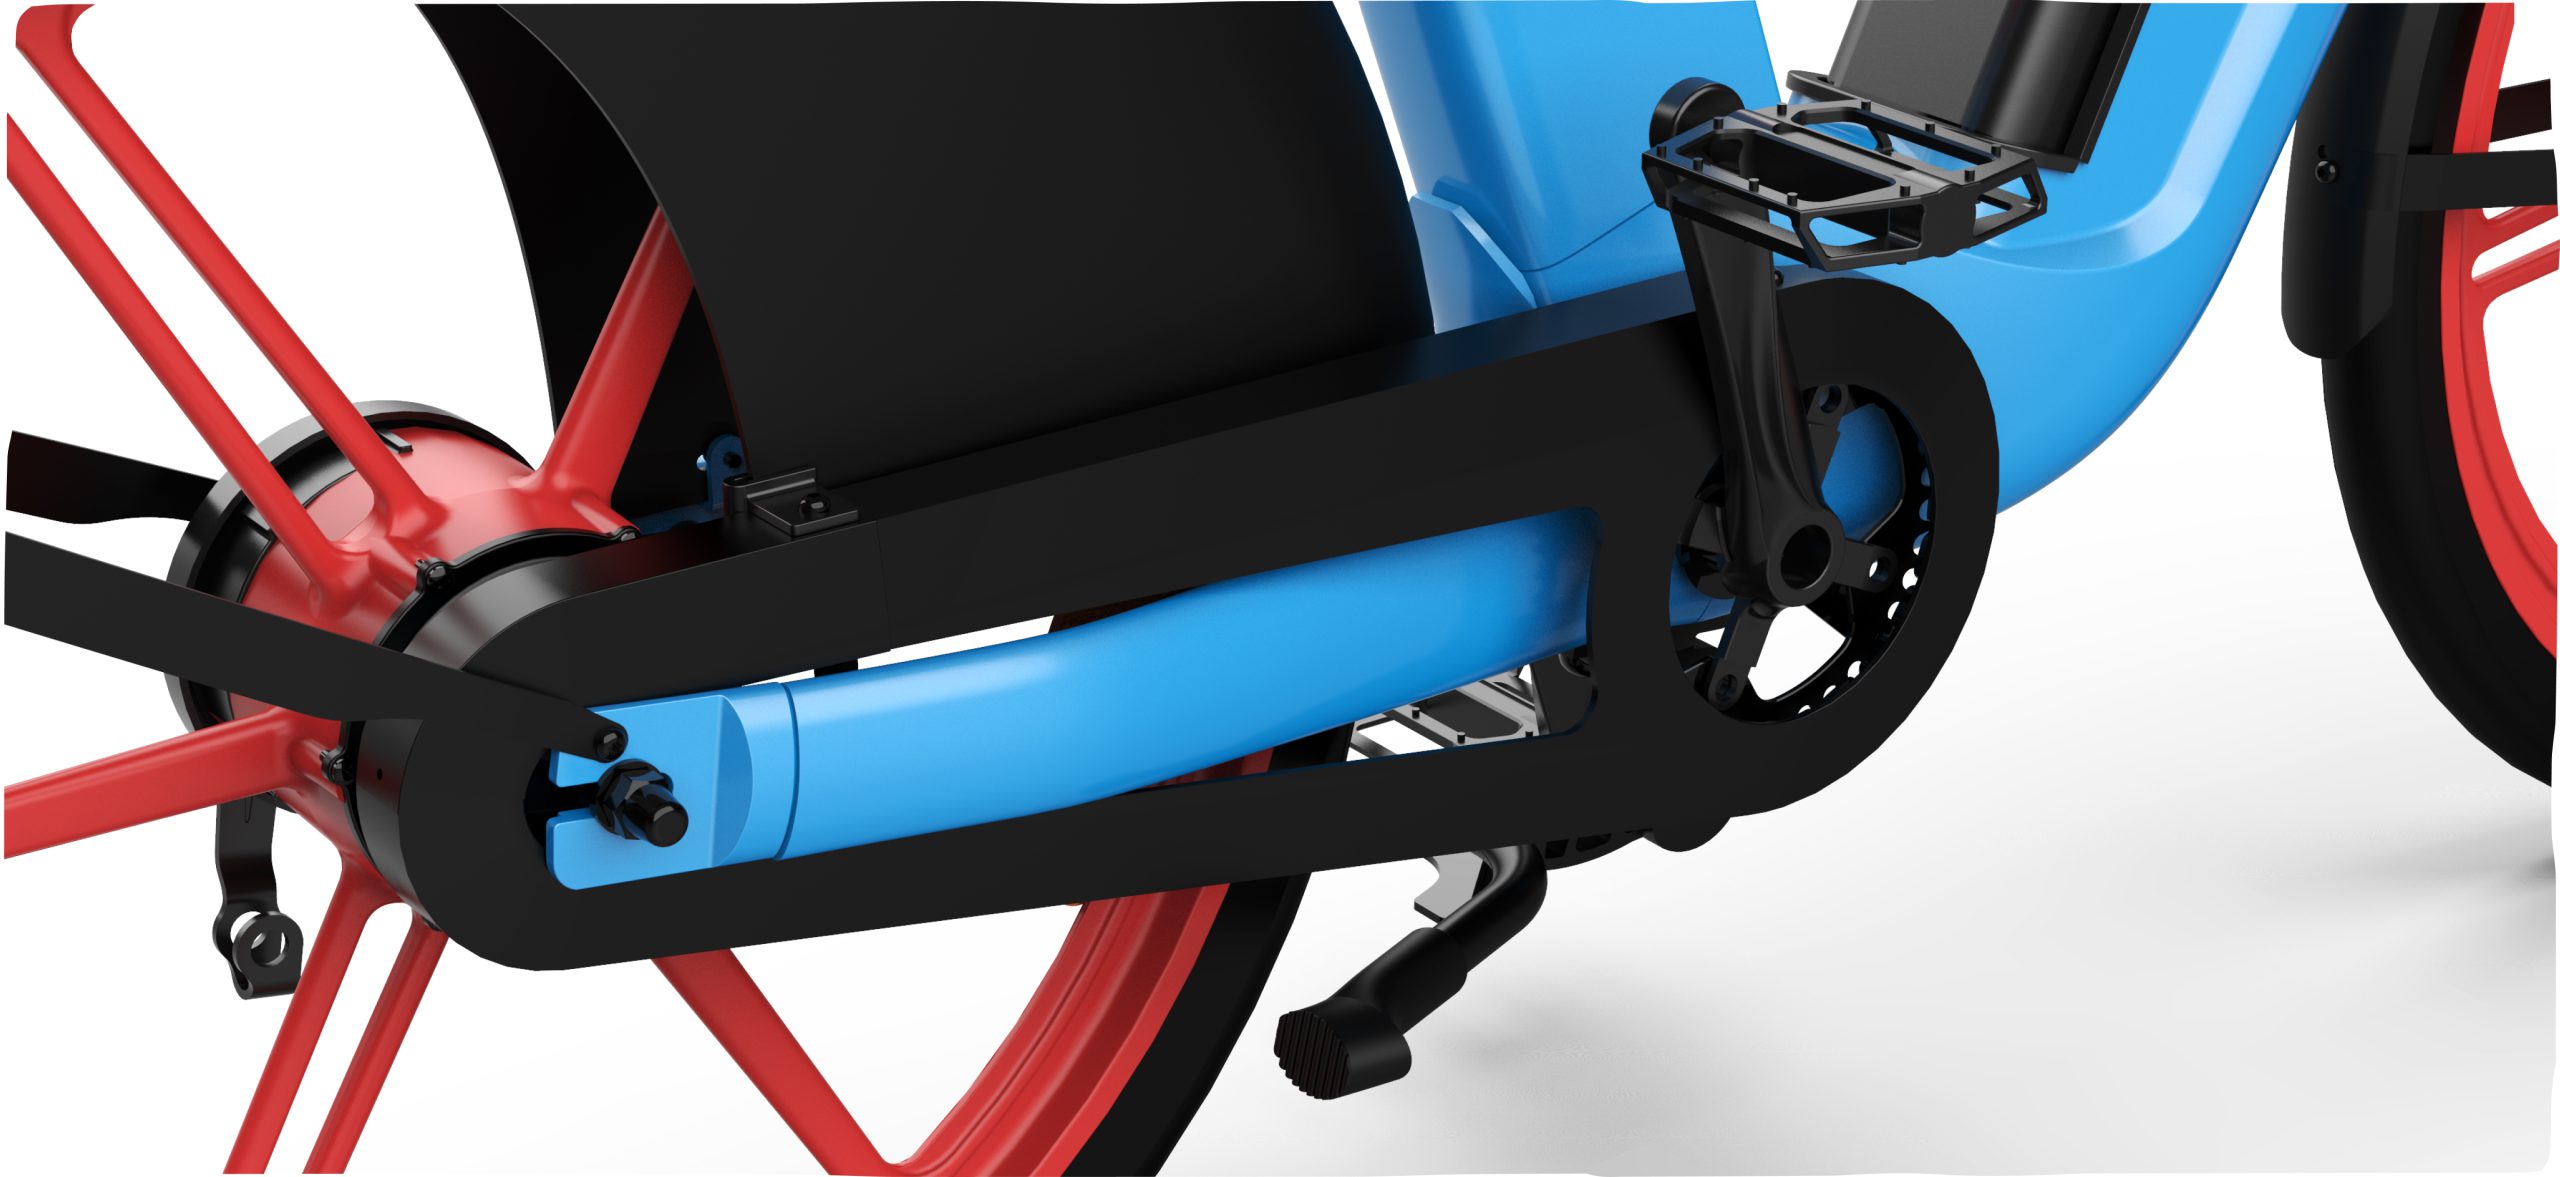 A closeup of the Dott e-bike, focussing specifically on the chain and back wheel.